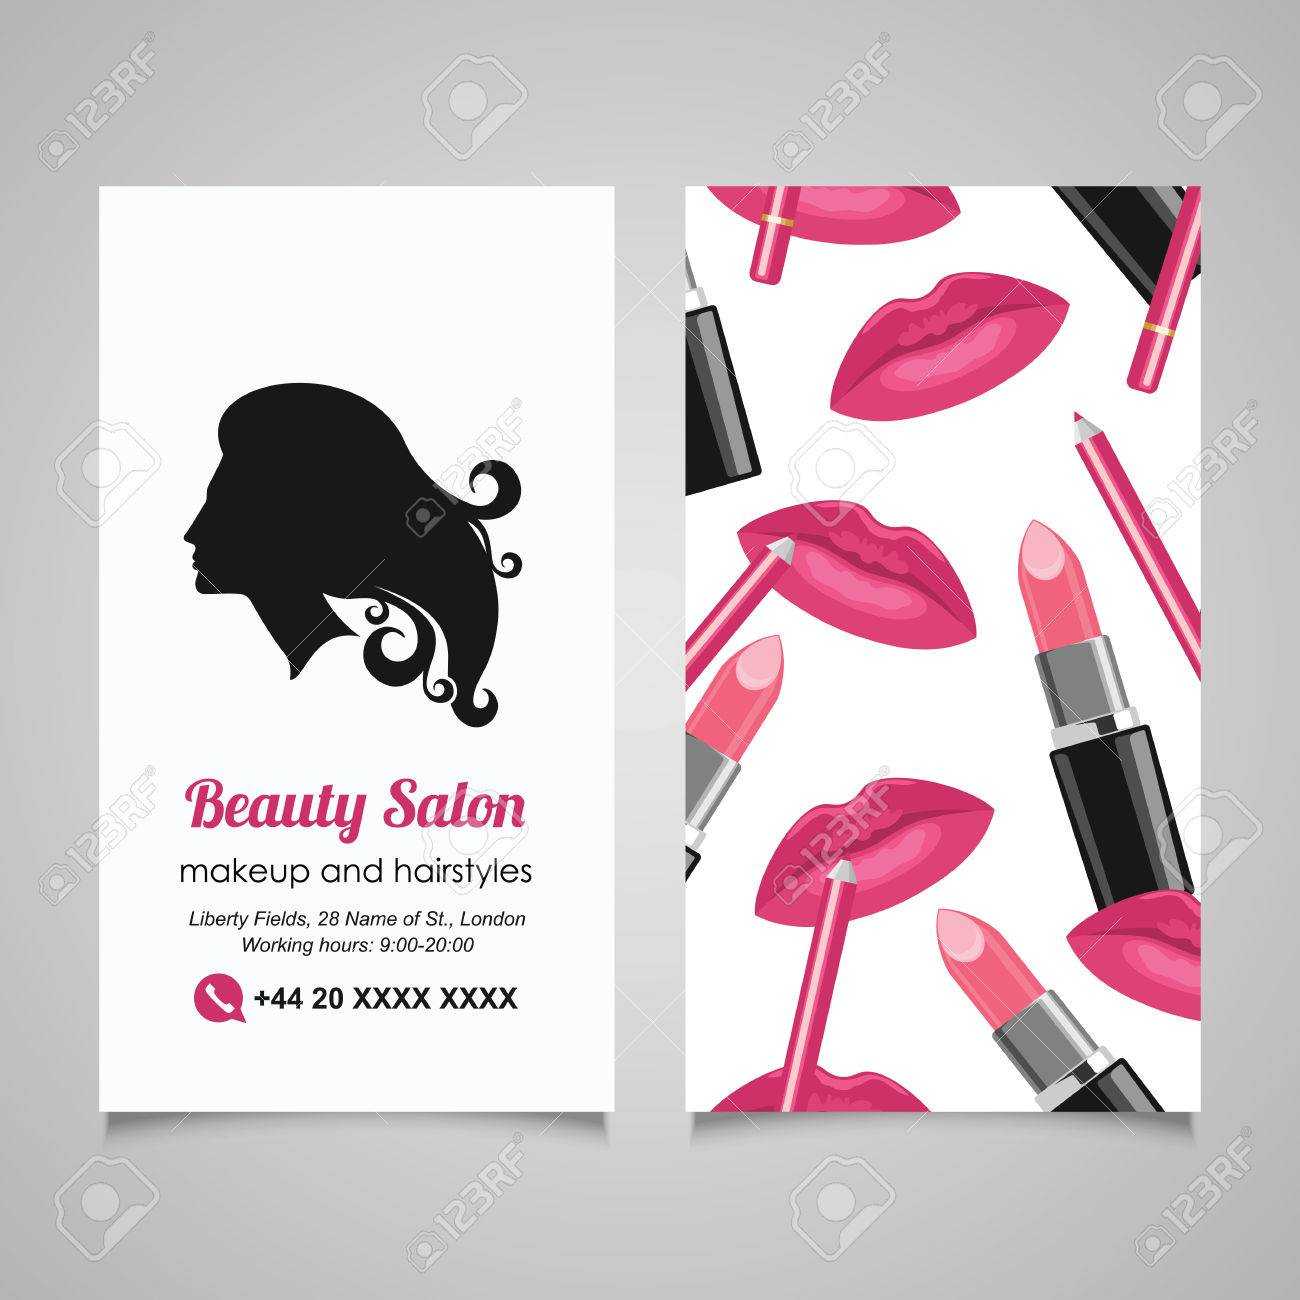 Beauty Salon Business Card Design Template With Beautiful Woman's.. Pertaining To Hair Salon Business Card Template